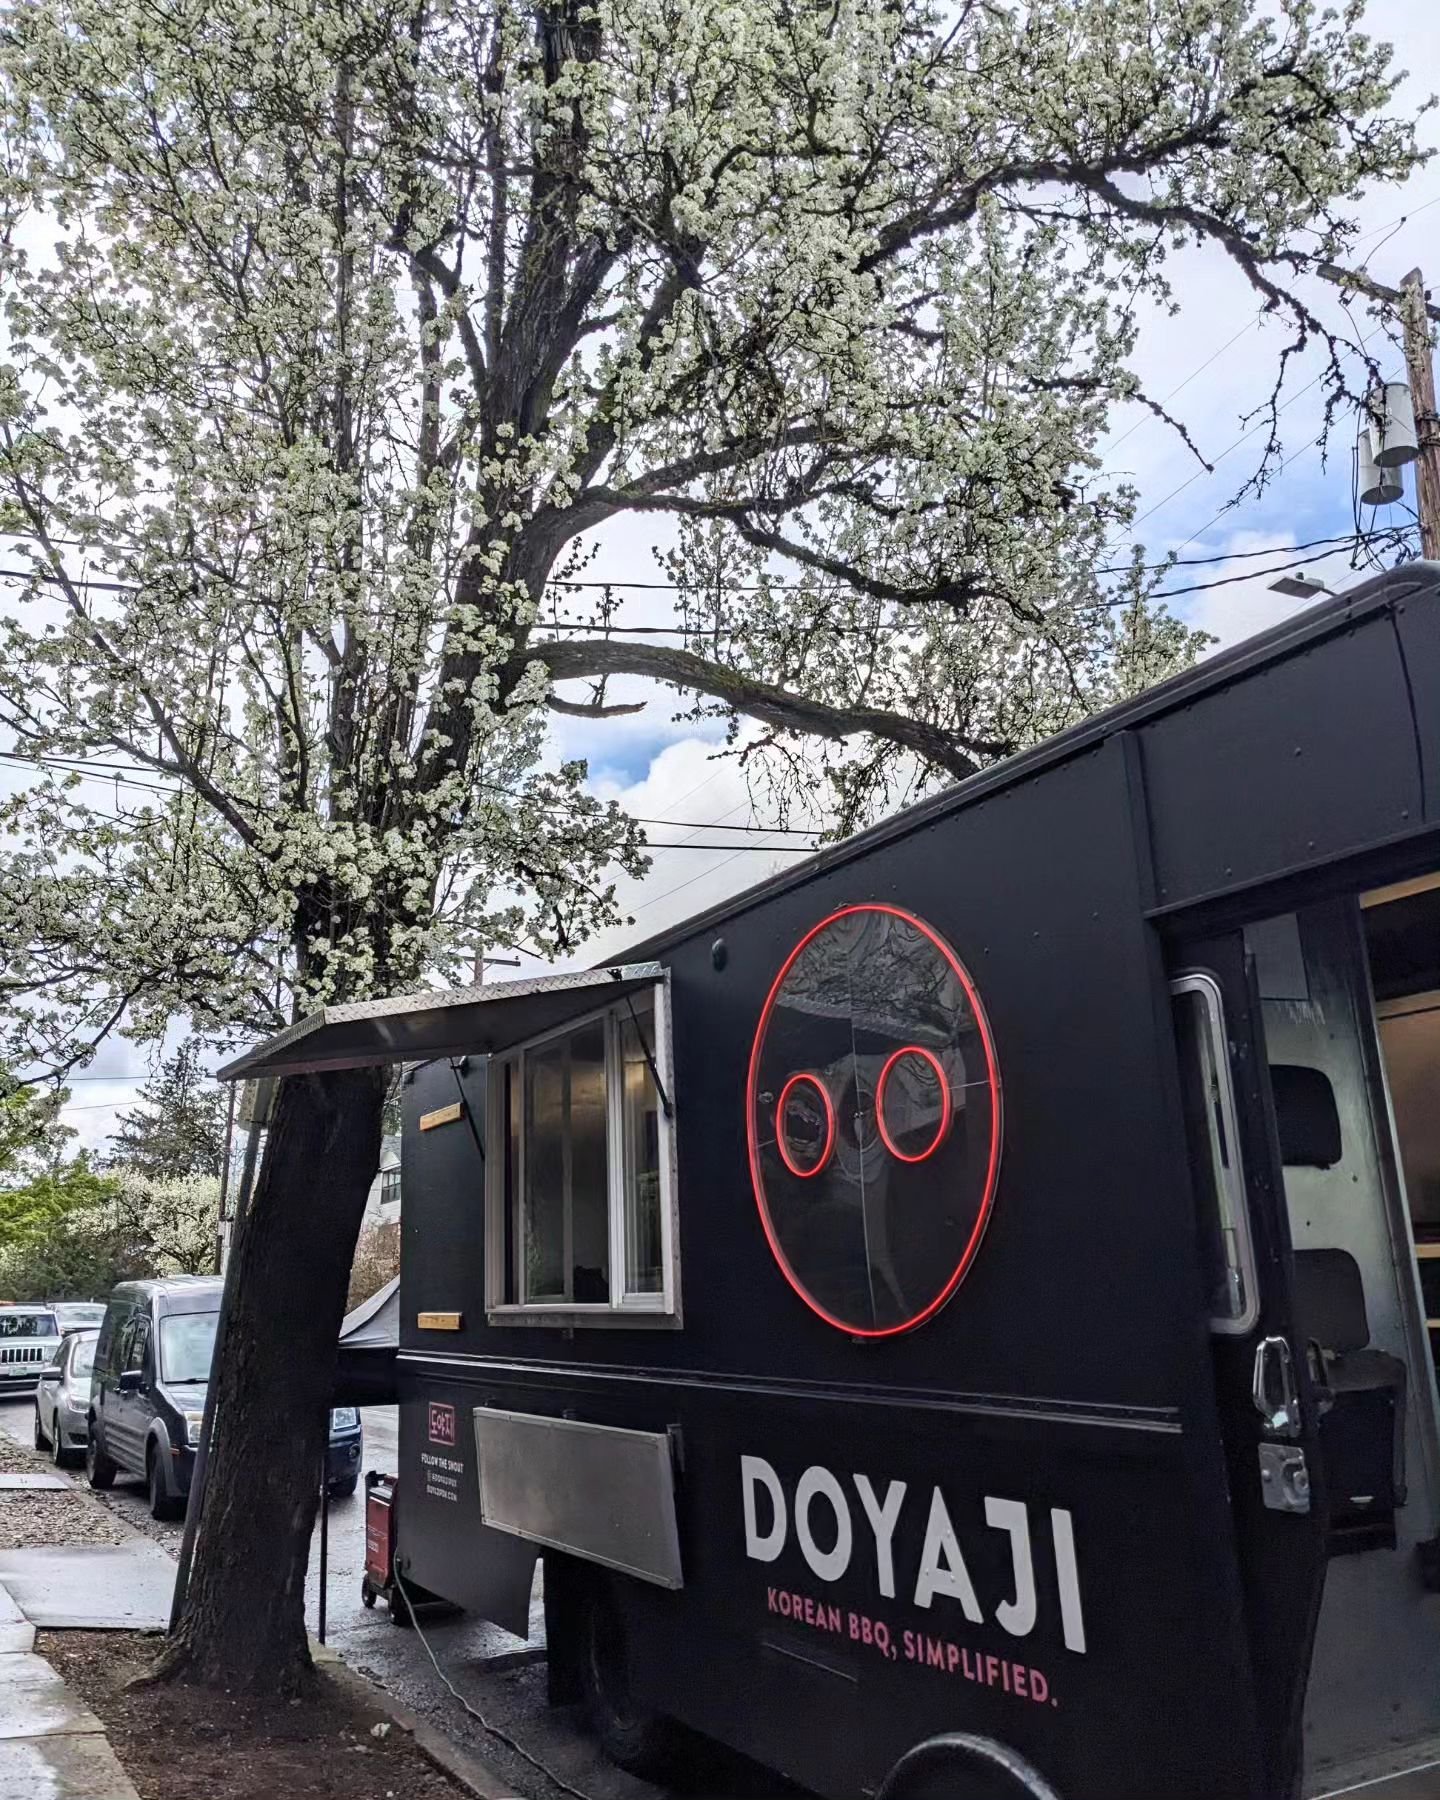 The changing of seasons has been so nice for us as a mobile truck out in the elements all the time. To have less rain, less layers, and more blossoms is always an exciting time for us! 🌸🌸🌸

It also means summer is on the horizon, which means even 